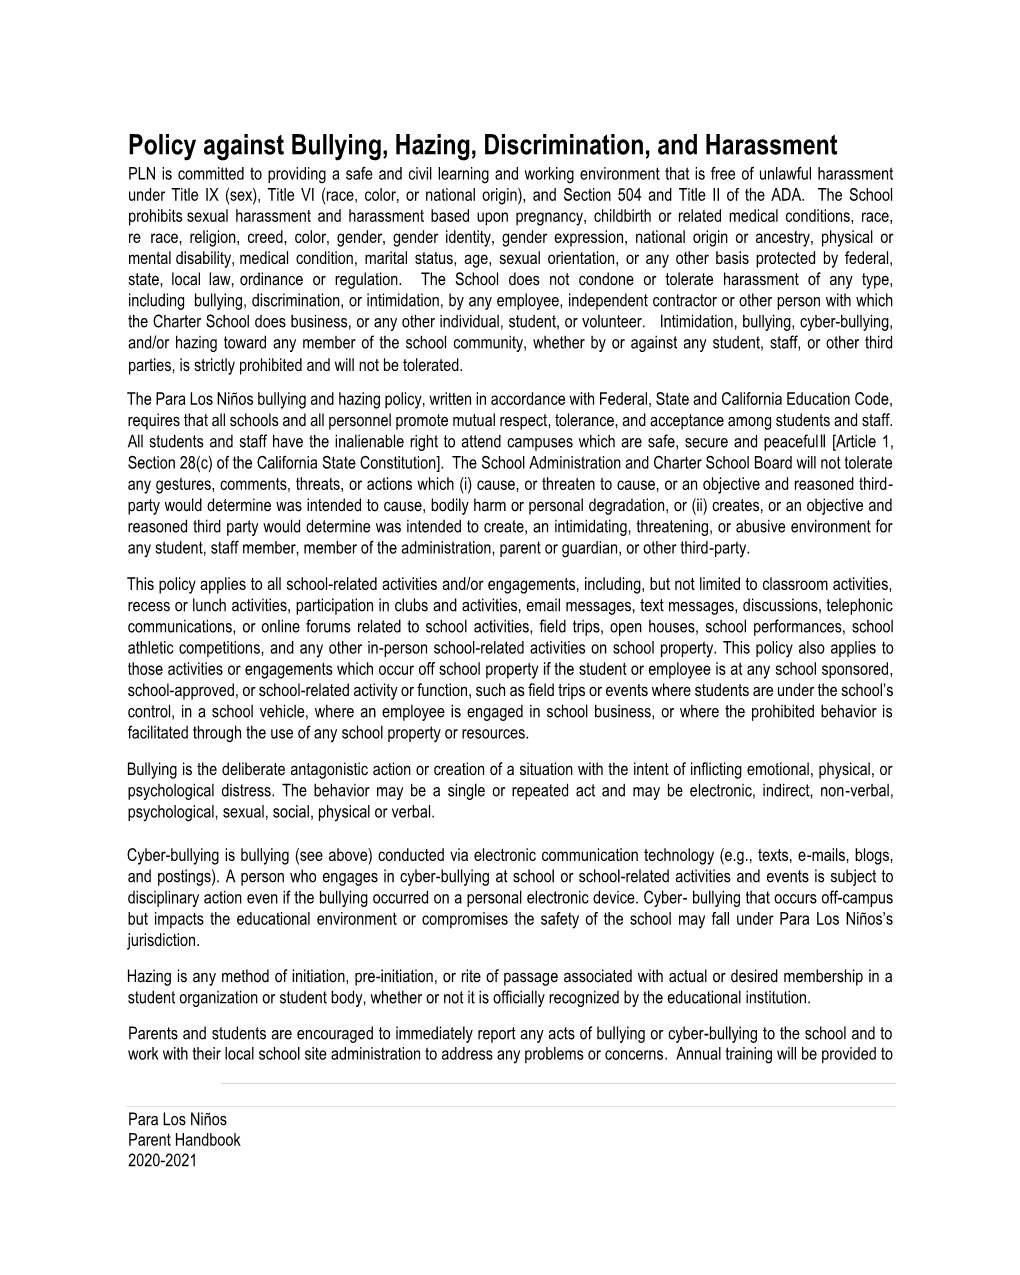 Policy Against Bullying, Hazing, Discrimination, and Harassment